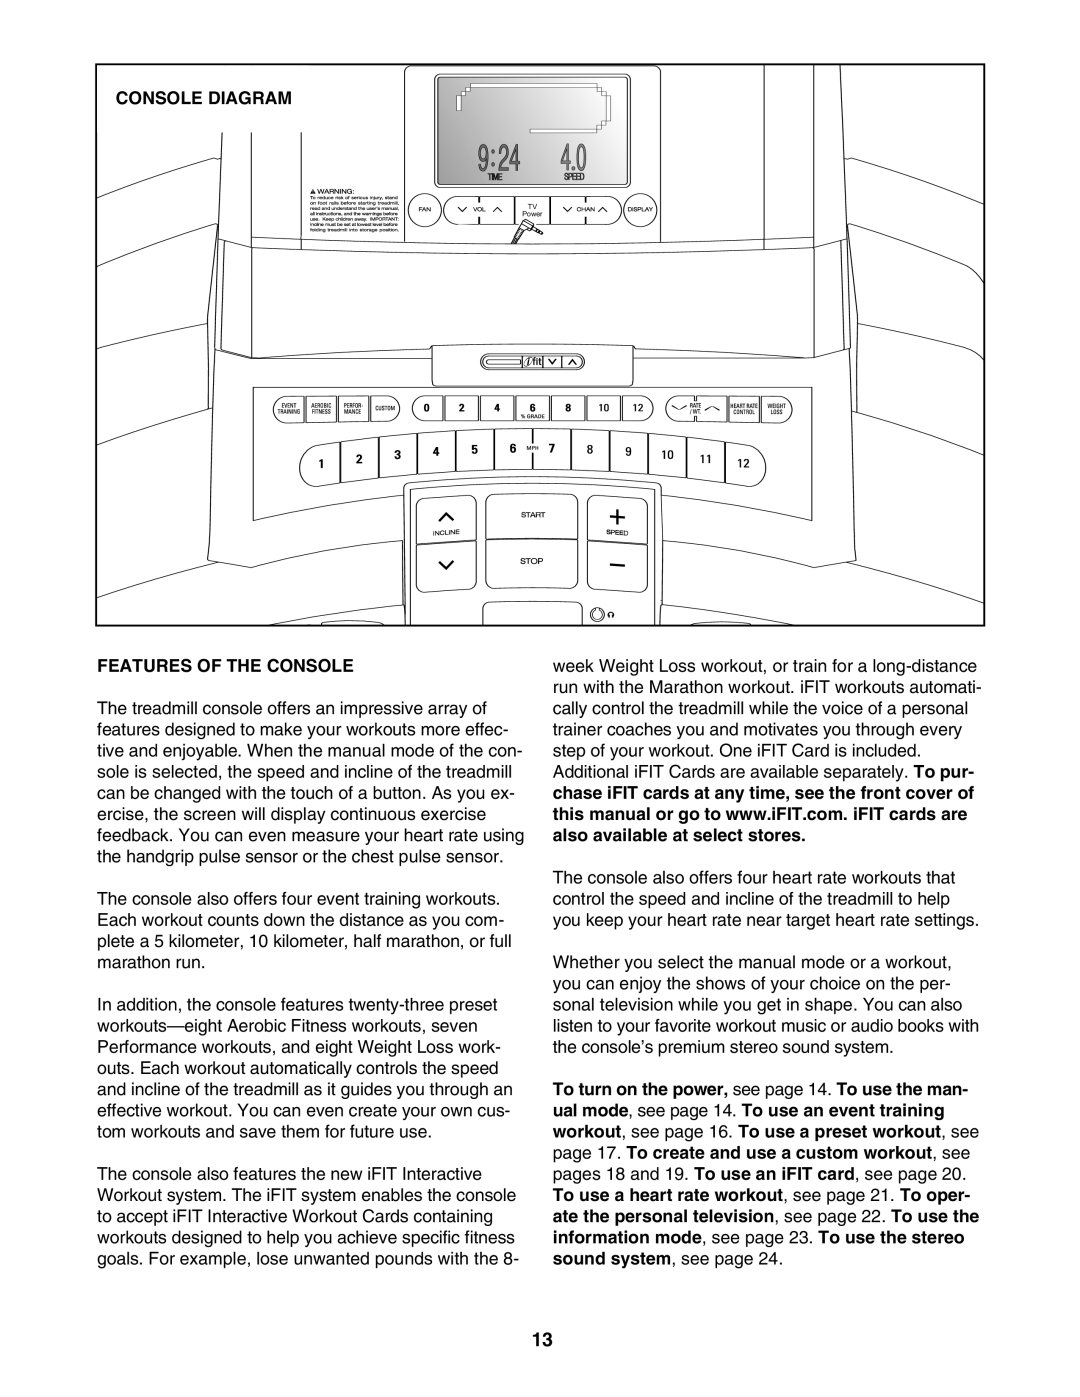 NordicTrack NTL19007.0 user manual Console Diagram, Features of the Console 